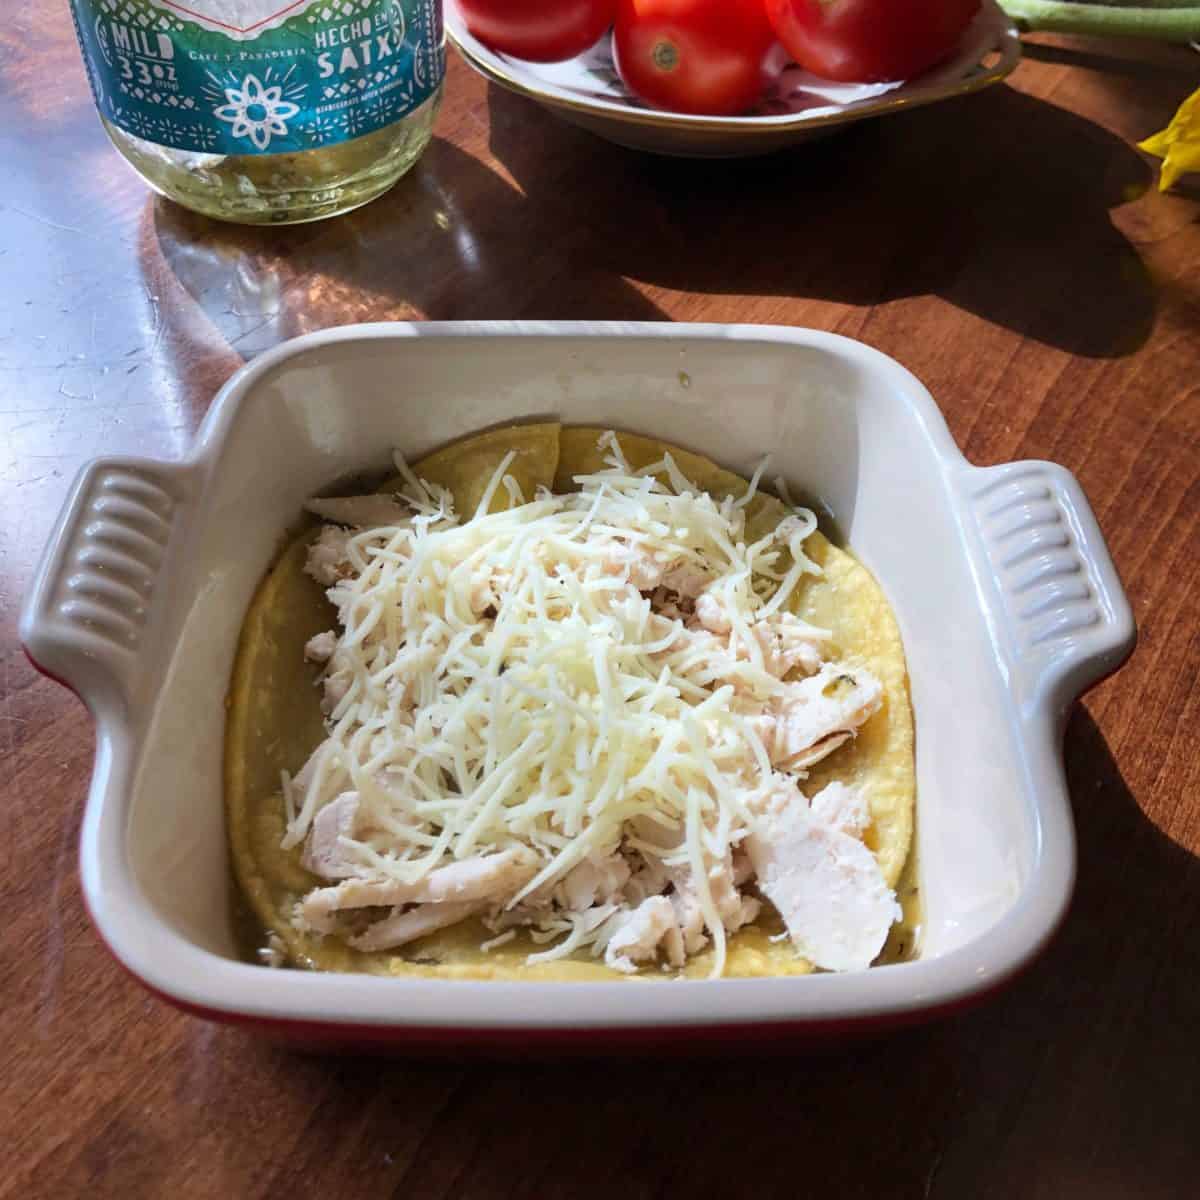 a corn tortilla in a small dish topped with chicken and cheese.